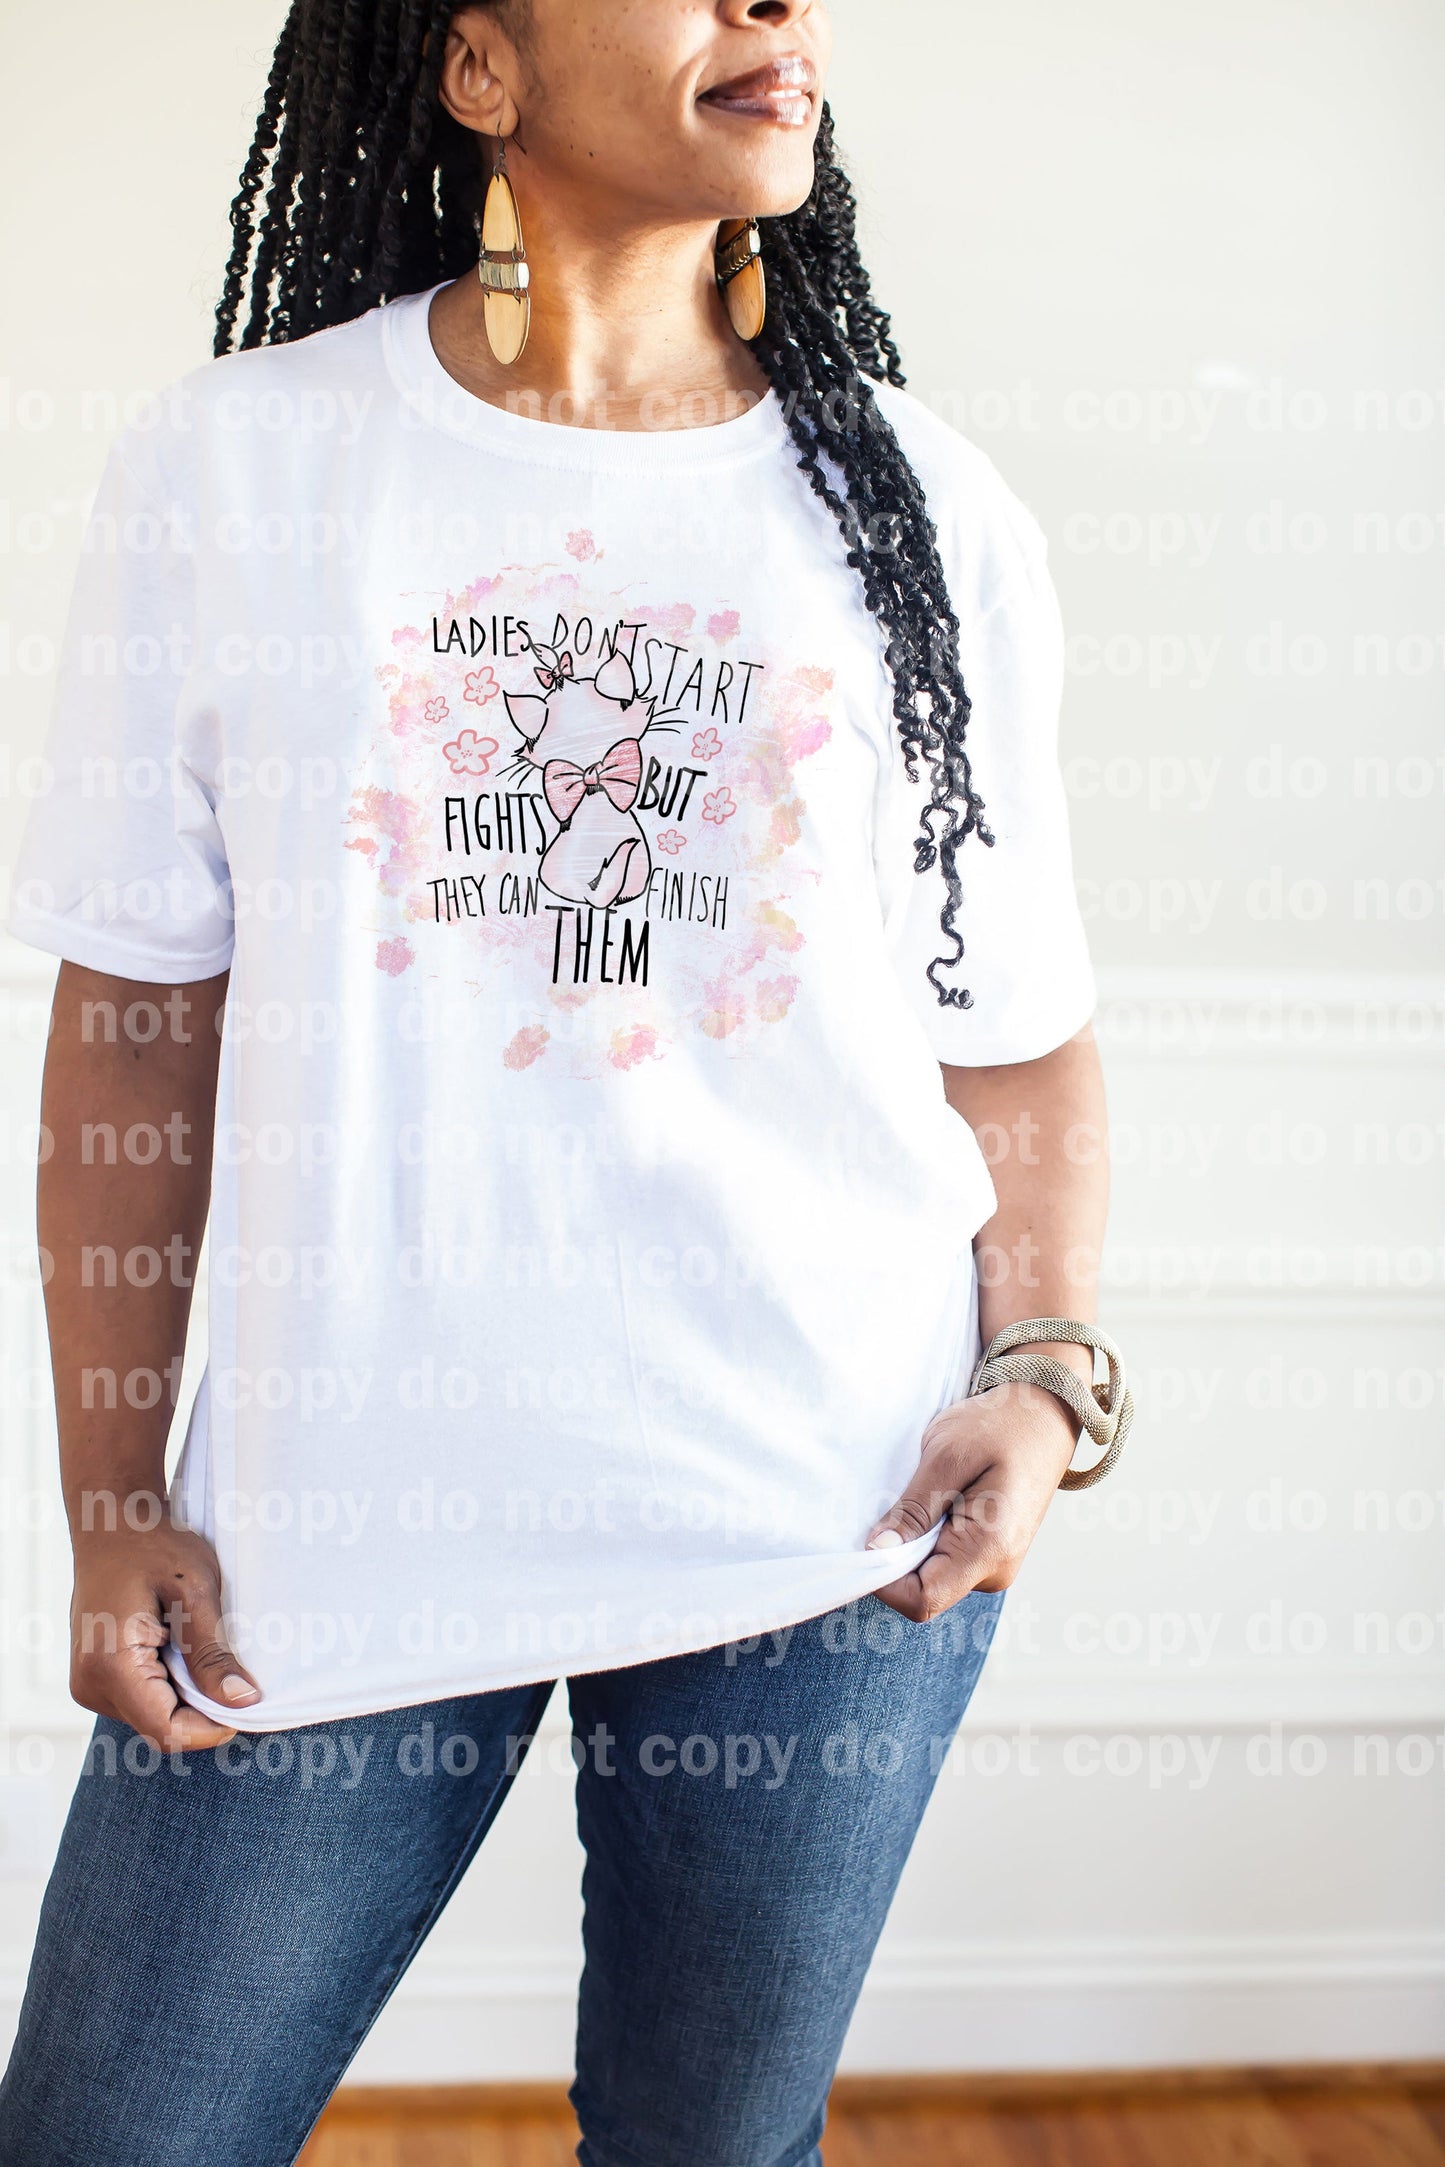 Ladies Don't Start Fight But They Can Finish Them Dream Print or Sublimation Print